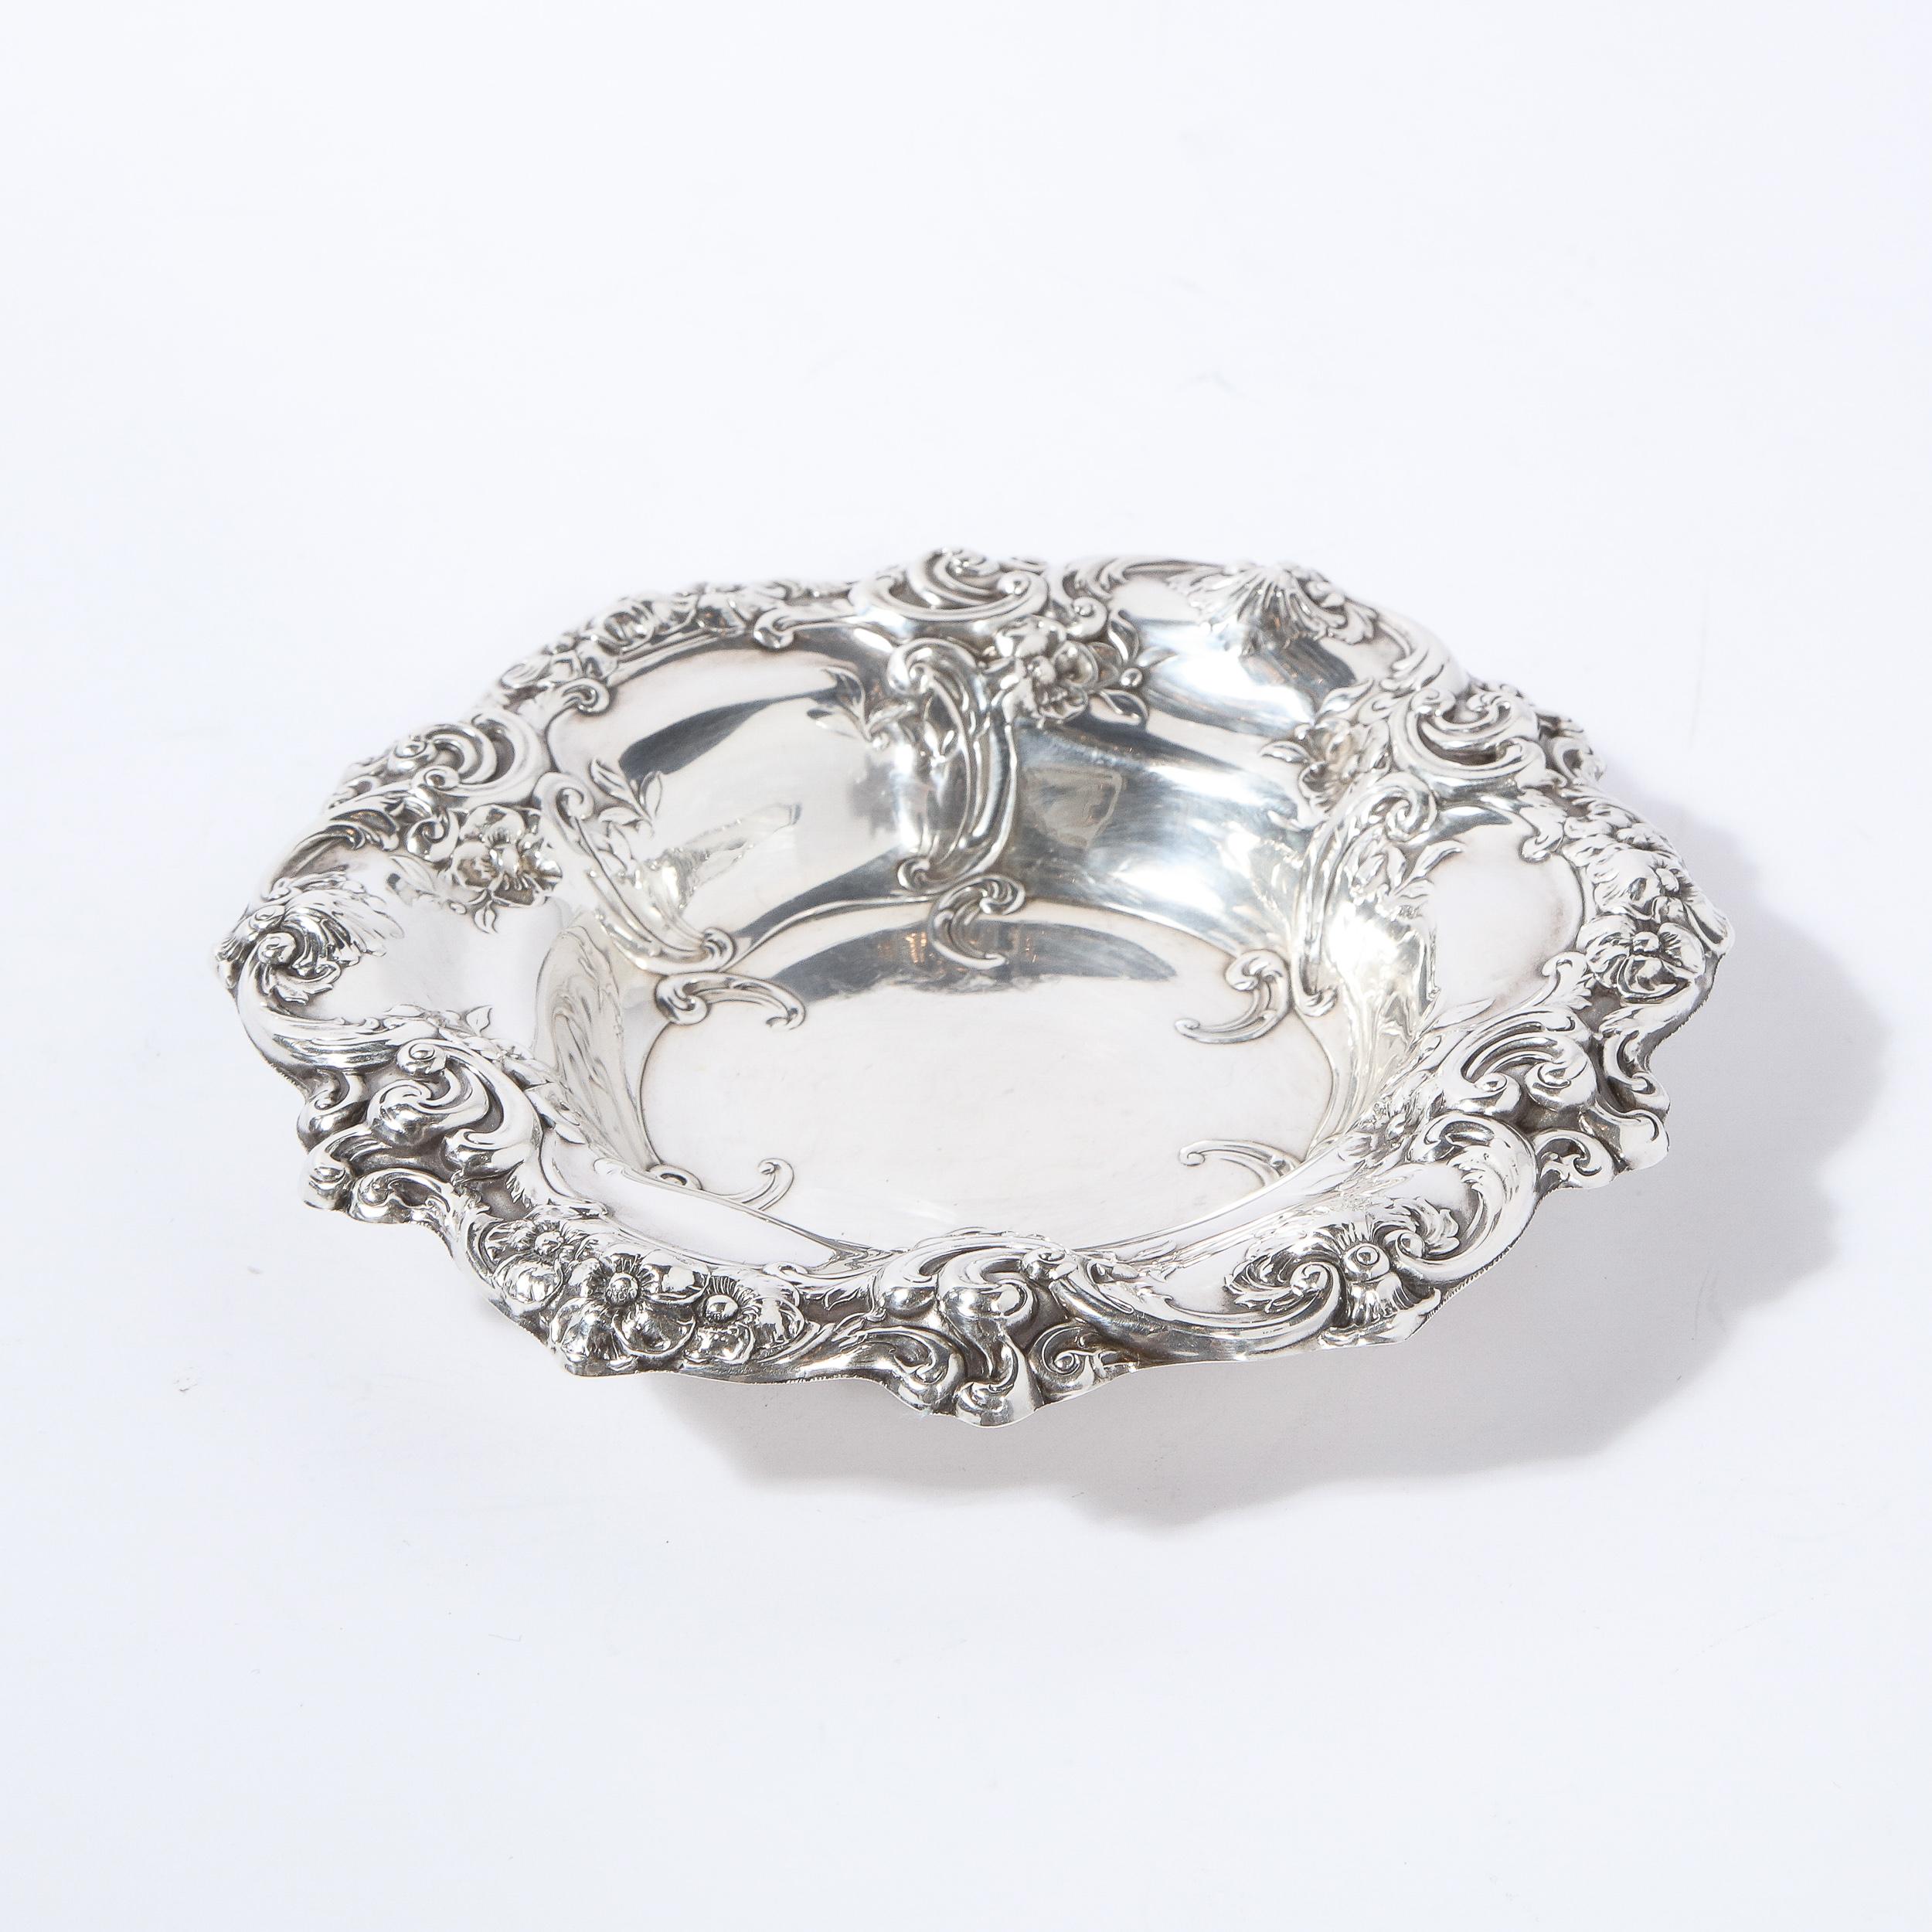 This stunning Art Nouveau/ Neoclassical style sterling silver decorative dish was realized by Gorham Silversmiths. It features a circular base and a raised scalloped border with a wealth of curvilinear and abstracted stylized foliate and floral